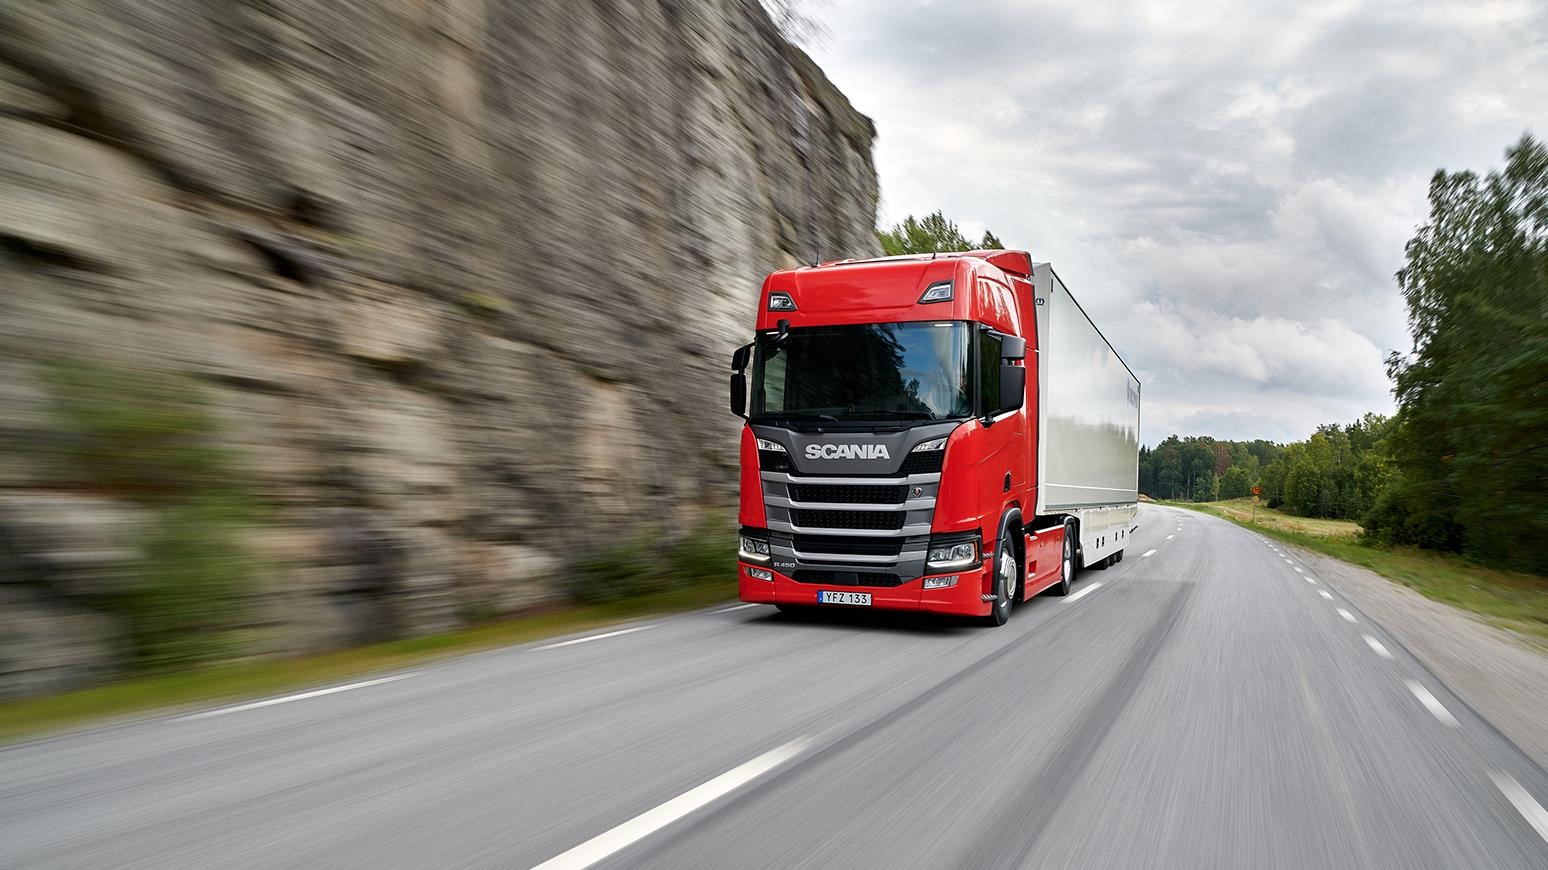 Spanish Trucking News Website Cites Scania R450 Highline As 2018’s Most Efficient Truck